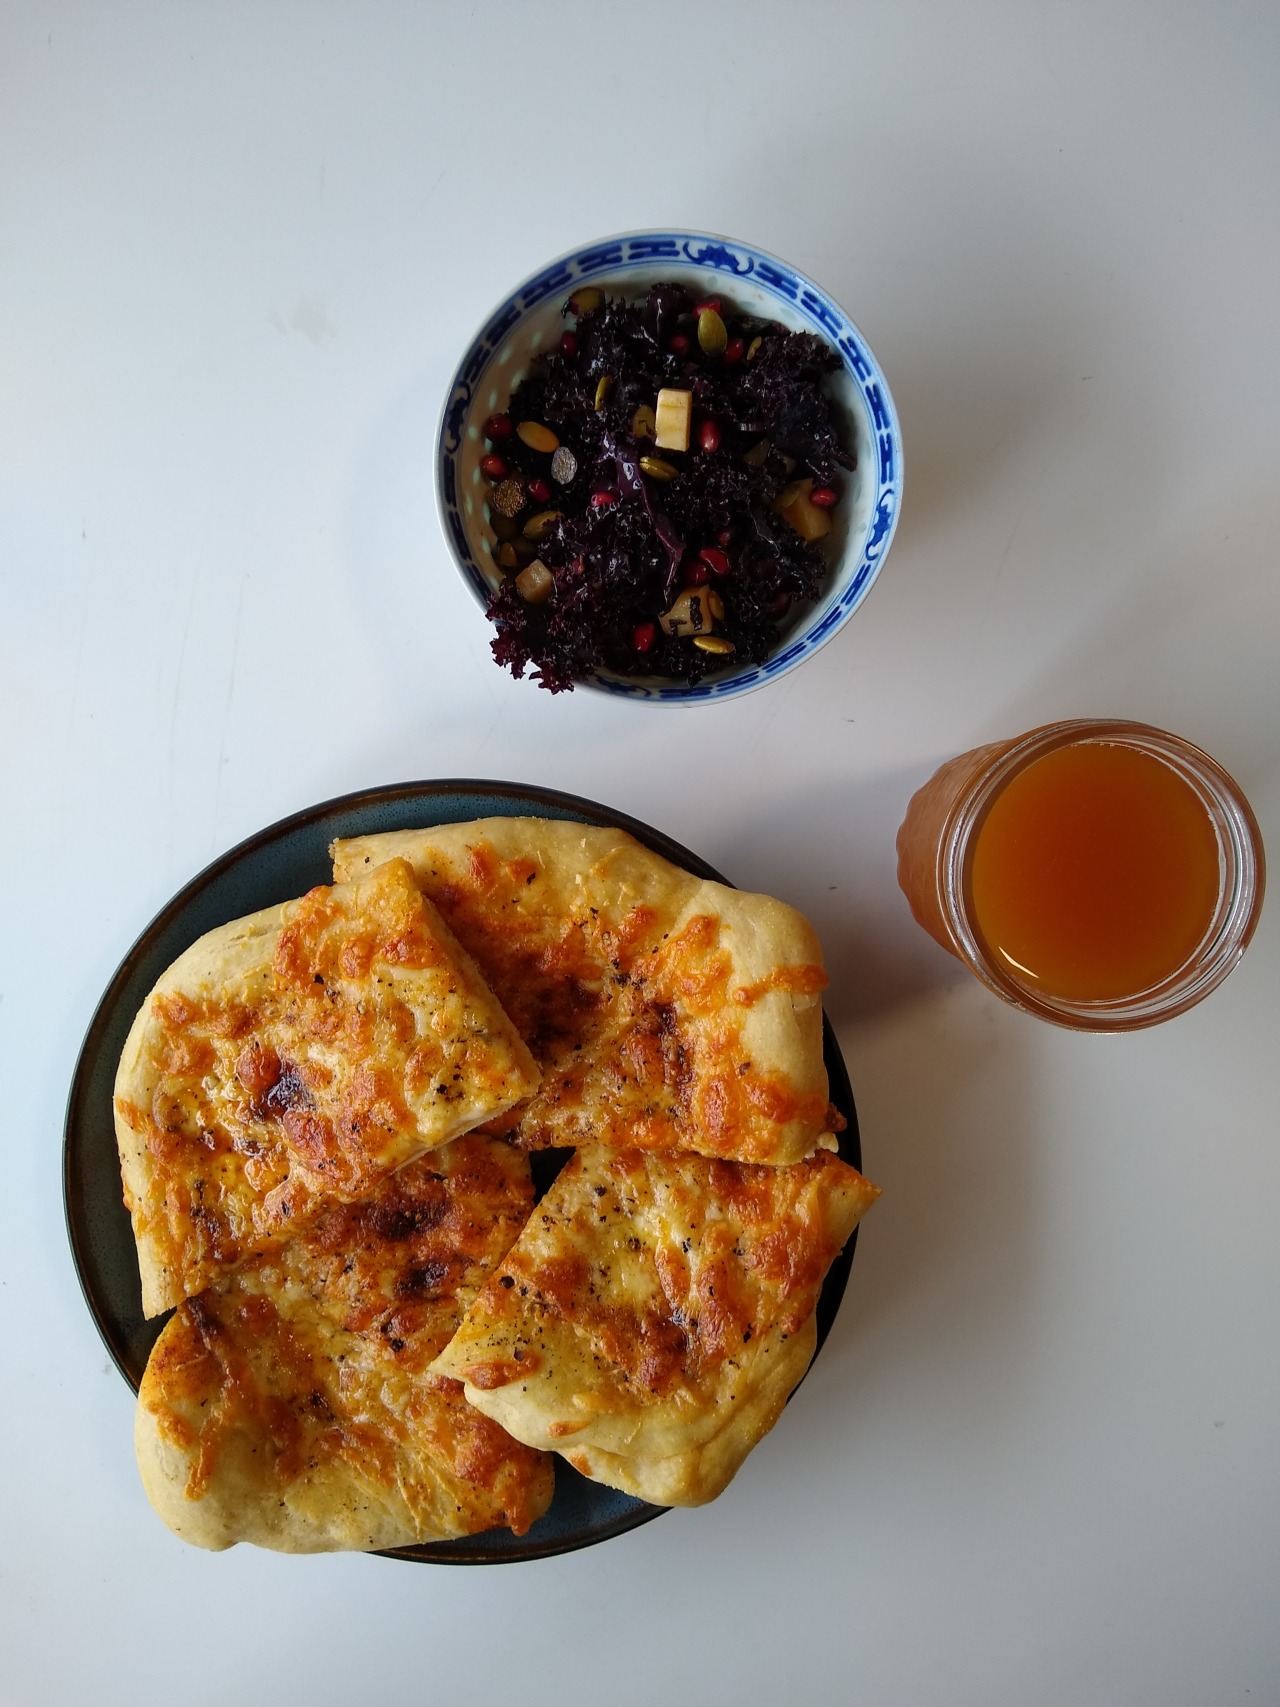 An overhead shot of cheese pizza on a blue plate, purple kale salad in a white and blue bowl, and apple cider in a canning jar, all on a white table.